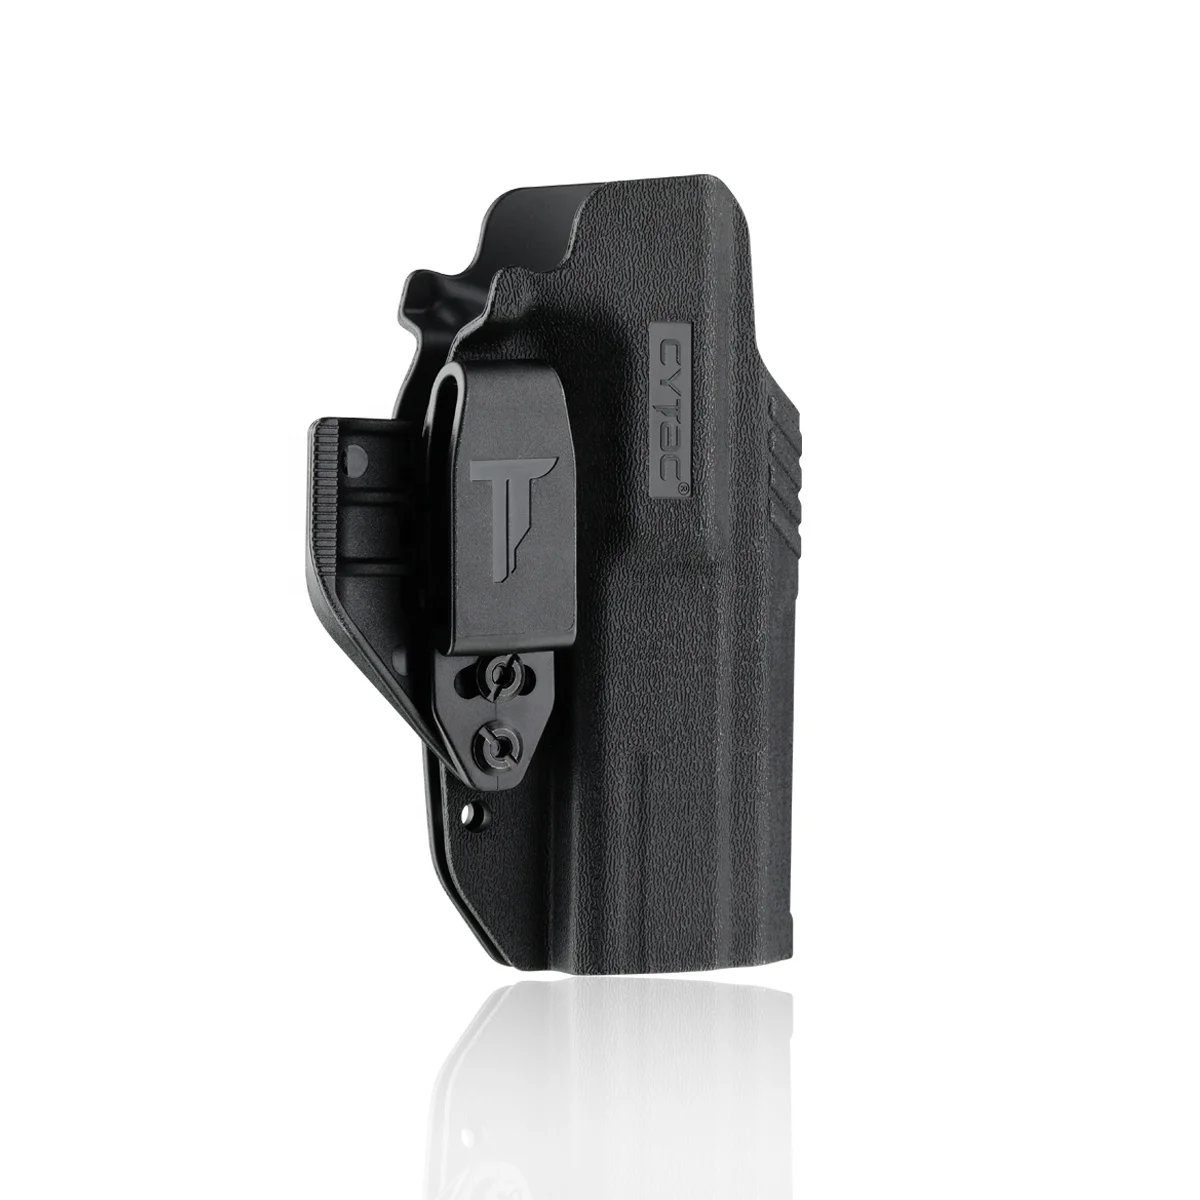 

Police Shooting Gear Cytac IWB Concealed Carry Holster for Taurus TS9, Black